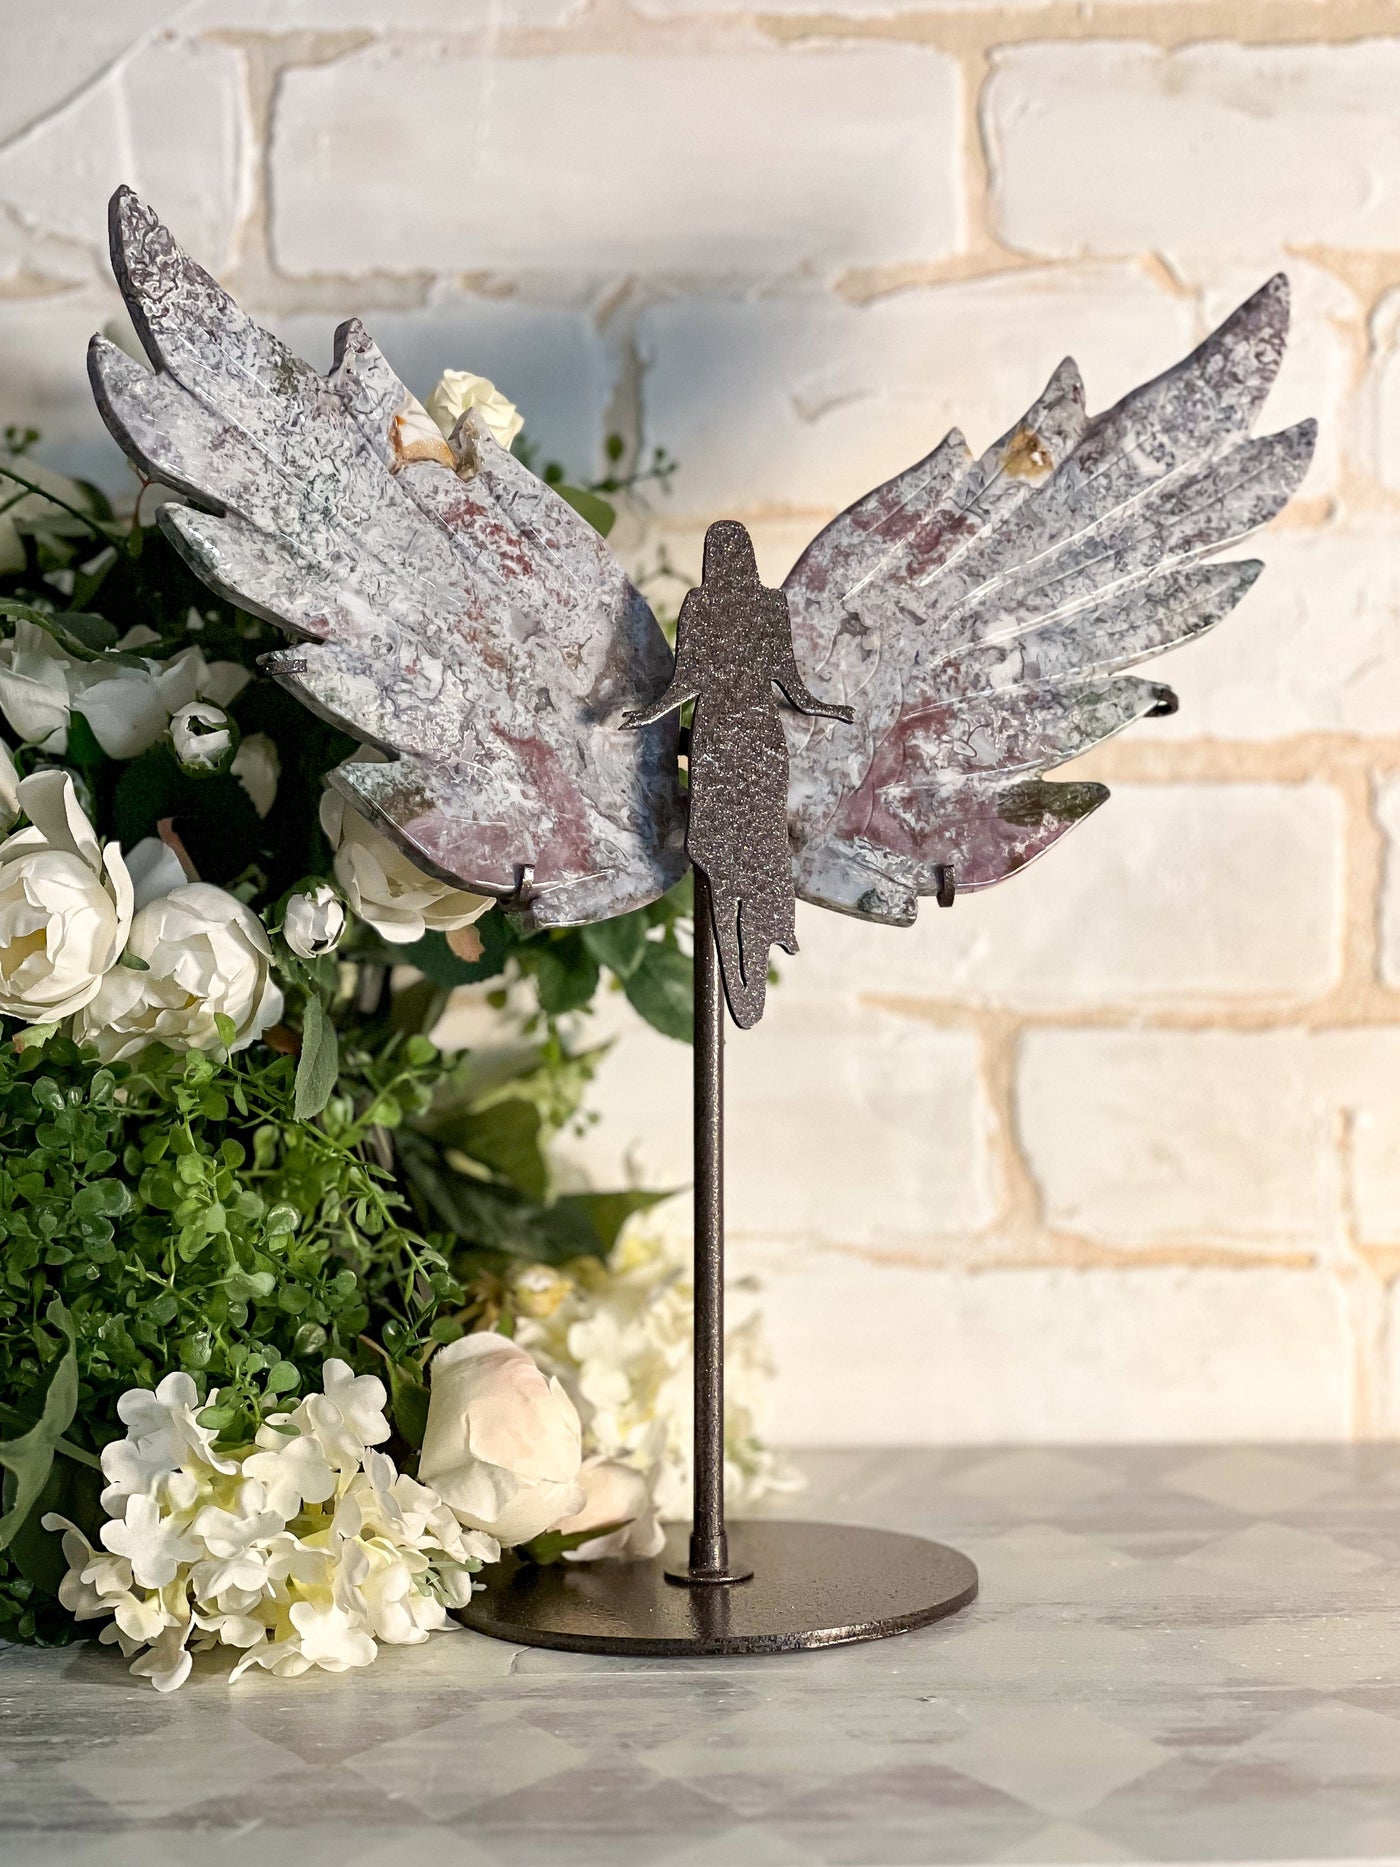 OCEAN JASPER ANGEL WINGS ON BRONZE SHIMMER STAND Revive In Style Vintage Furniture Painted Refinished Redesign Beautiful One of a Kind Artistic Antique Unique Home Decor Interior Design French Country Shabby Chic Cottage Farmhouse Grandmillenial Coastal Chalk Paint Metallic Glam Eclectic Quality Dovetailed Rustic Furniture Painter Pinterest Bedroom Living Room Entryway Kitchen Home Trends House Styles Decorating ideas